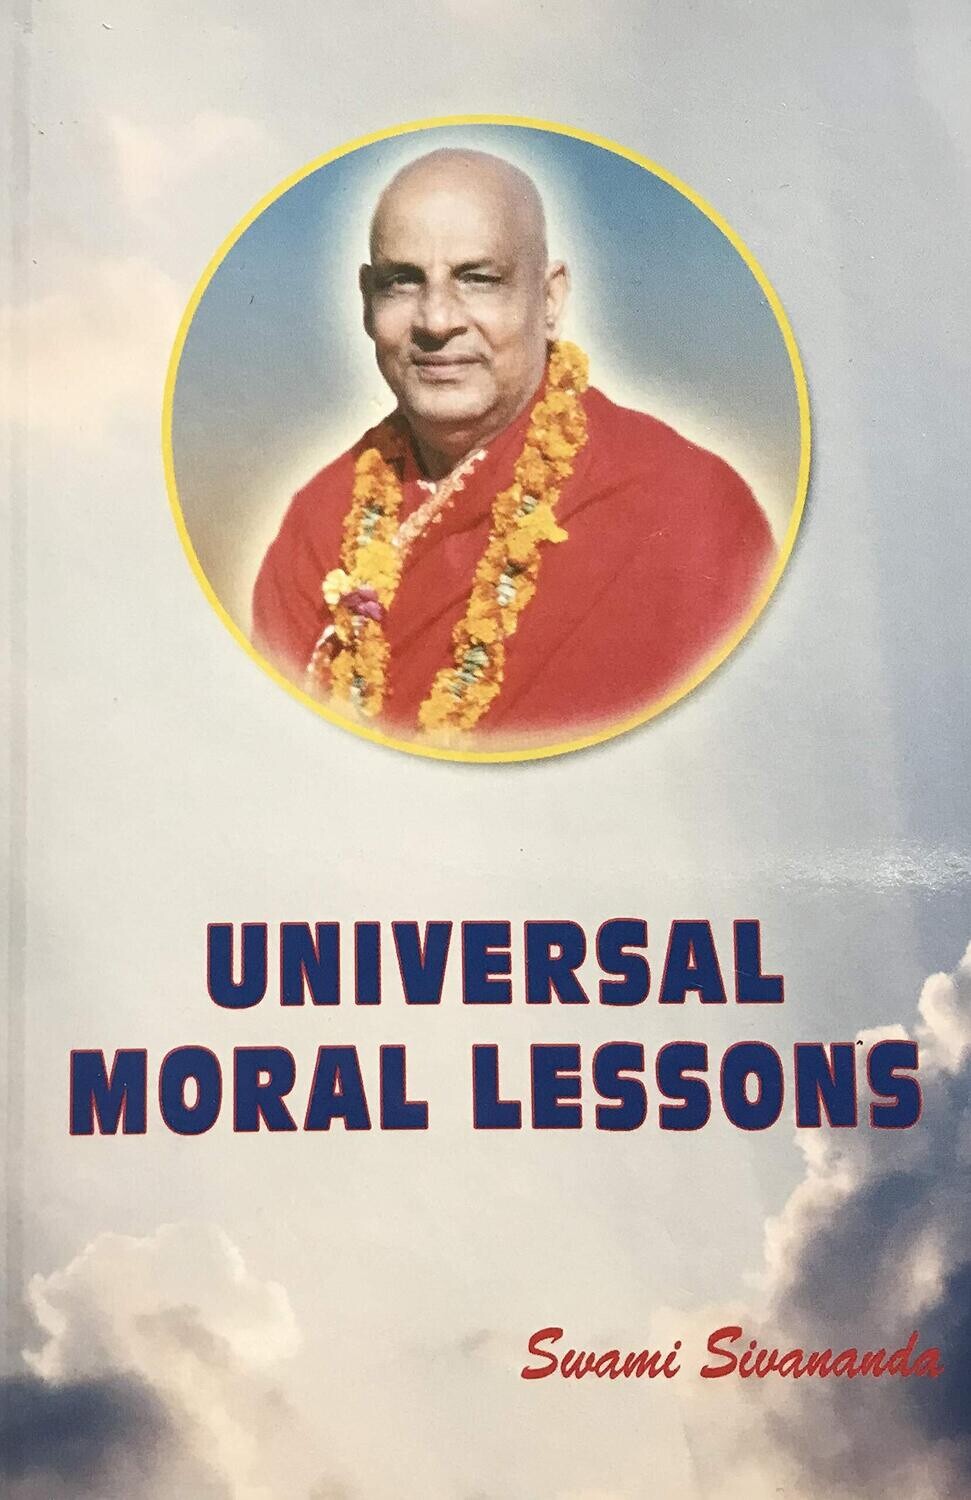 UNIVERSAL MORAL LESSONS